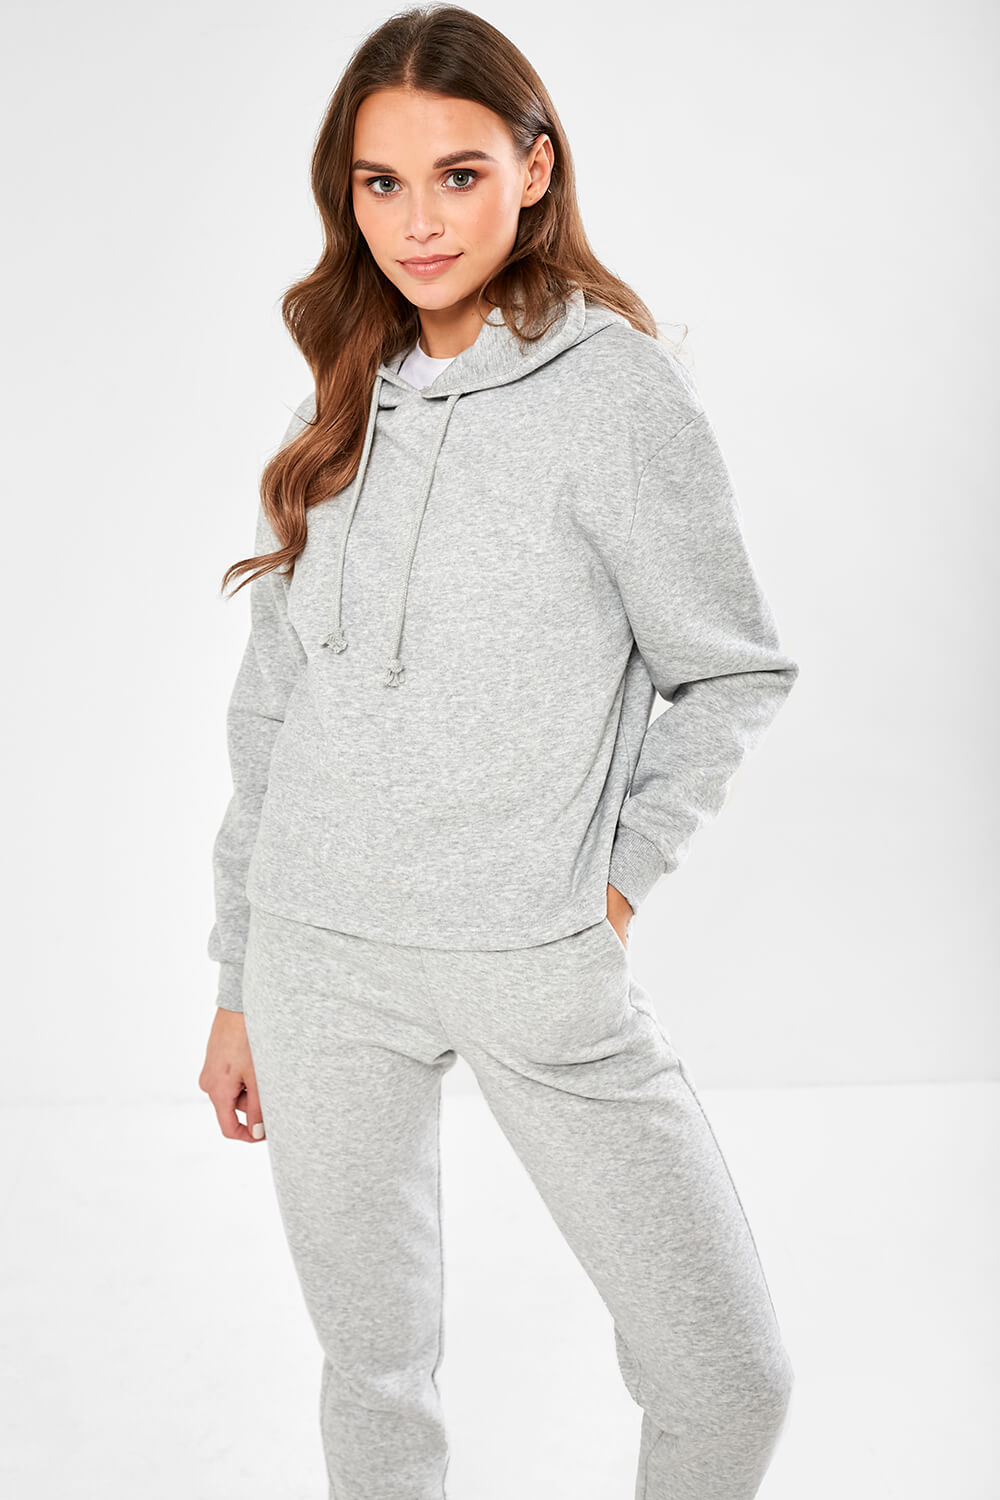 Pieces Chilli Hoodie in Light Grey | iCLOTHING - iCLOTHING